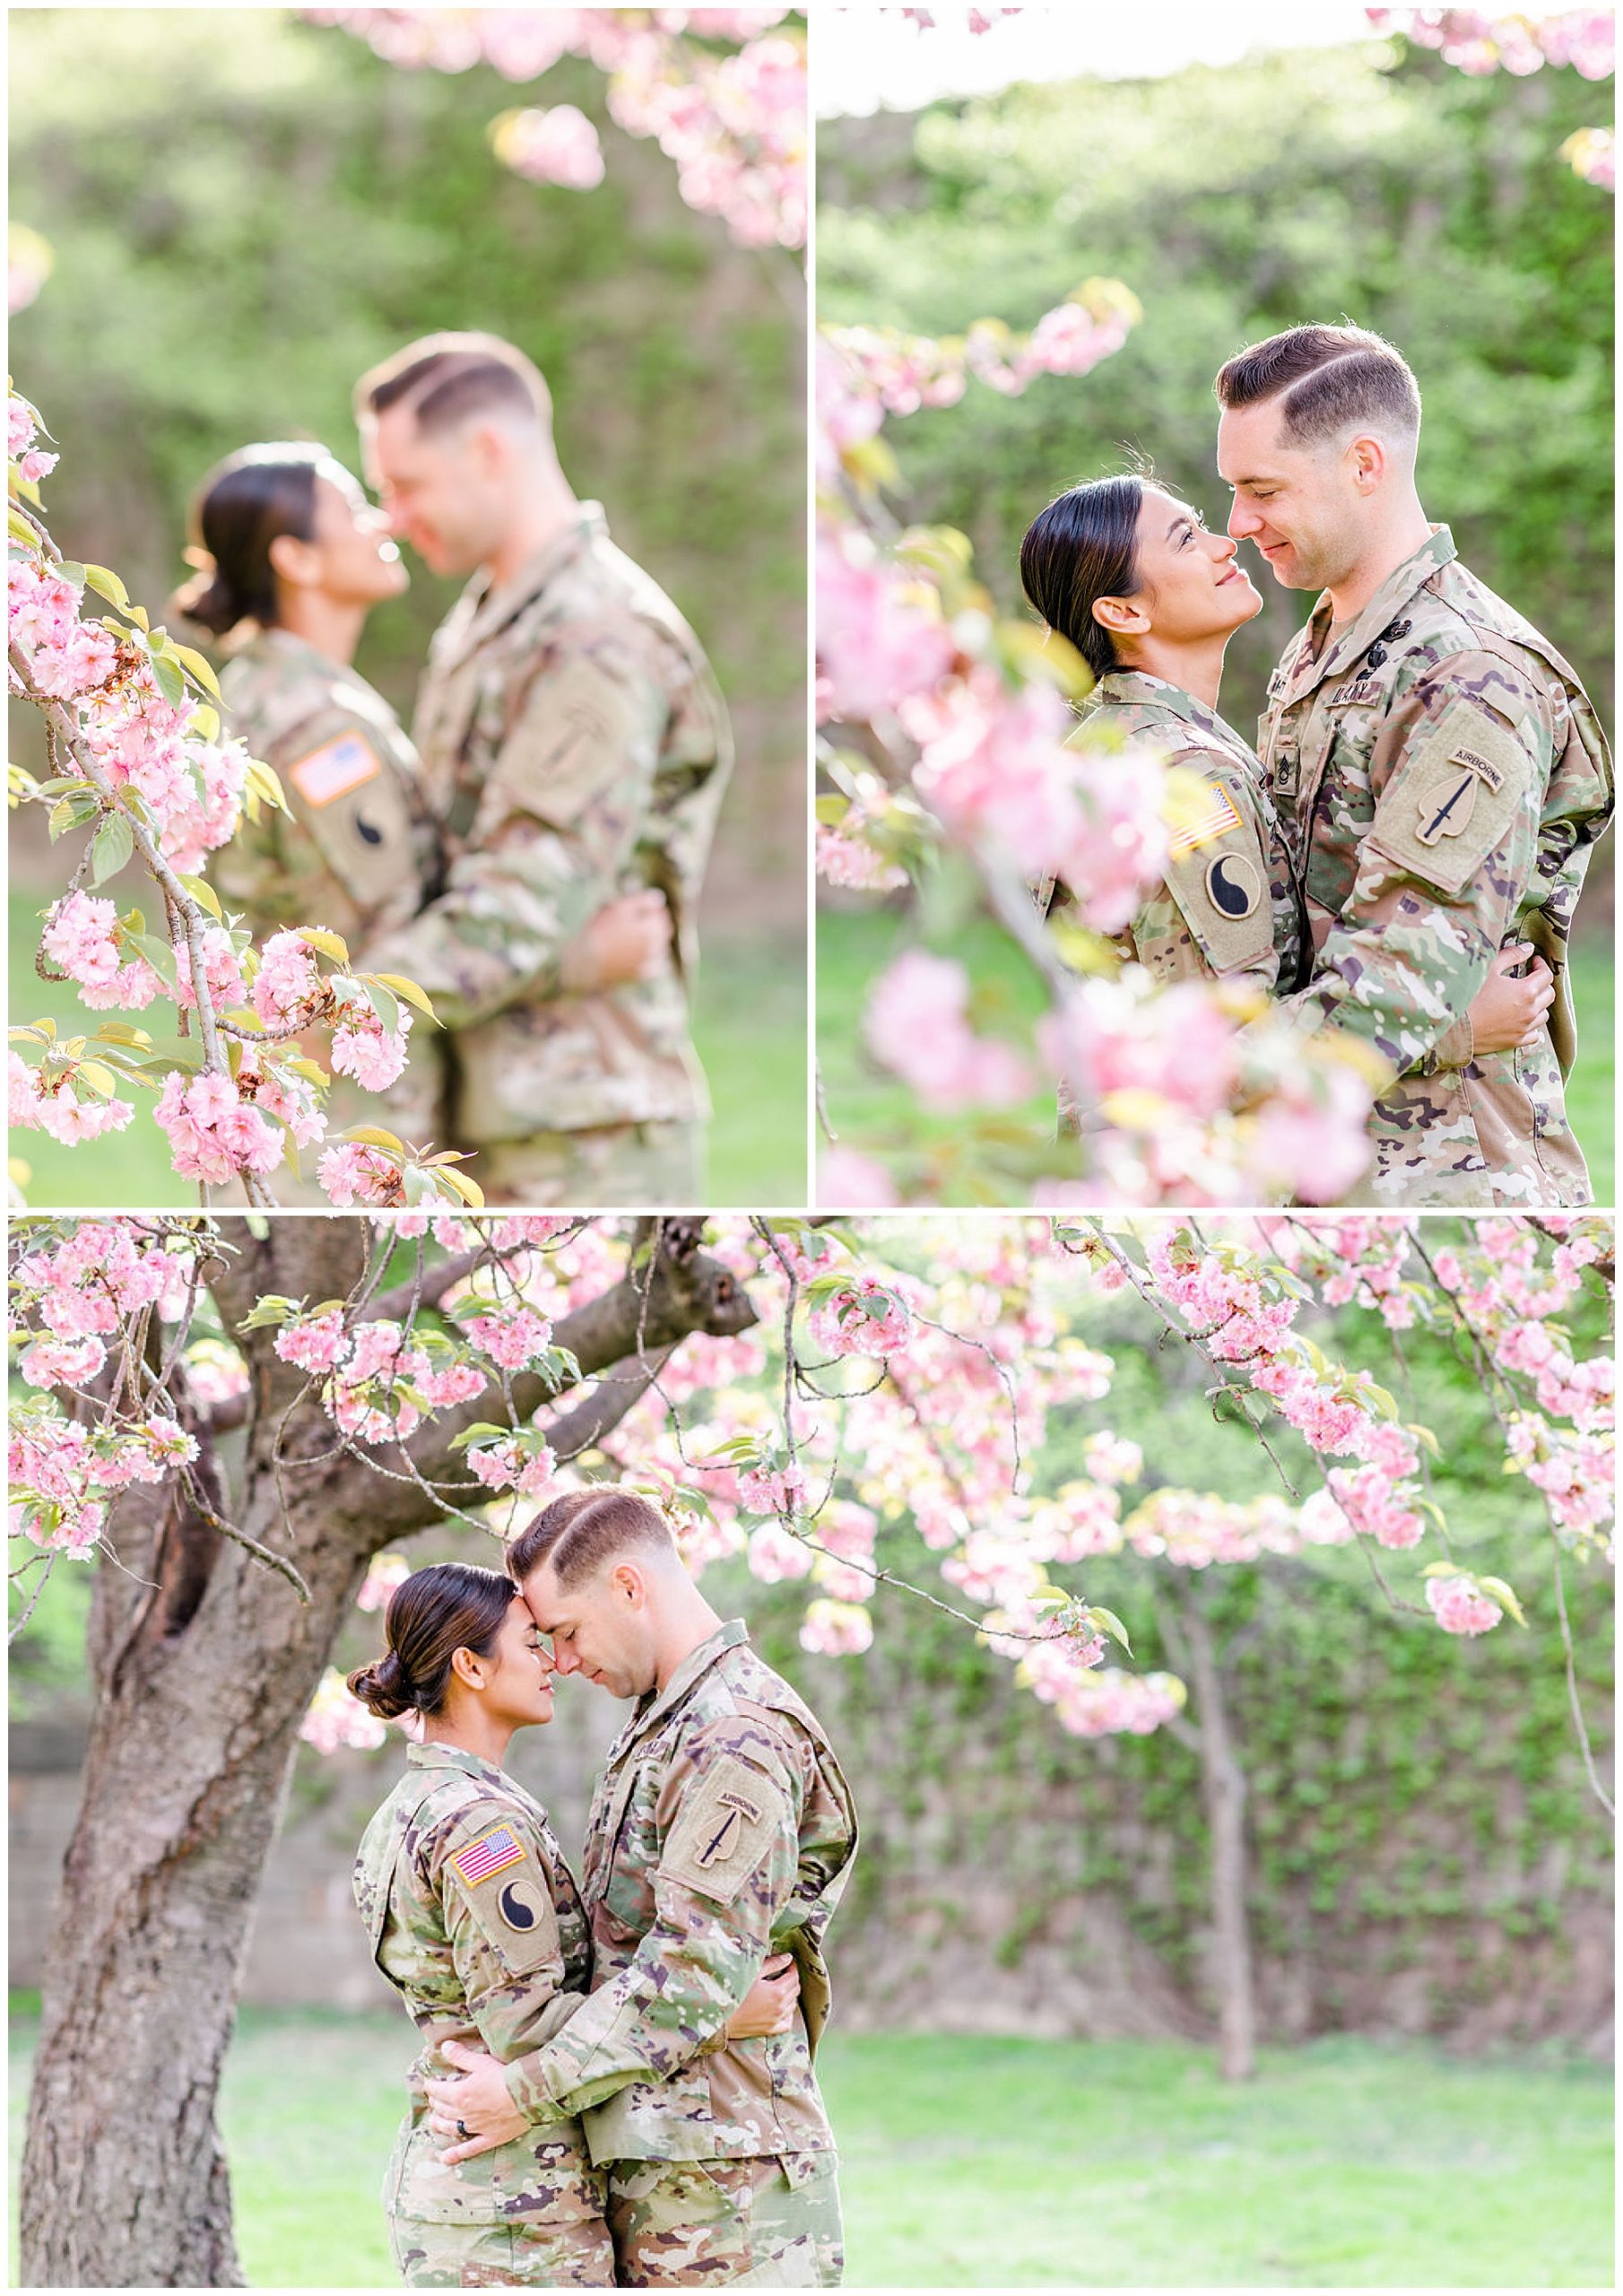 kwanzan cherry blossom portraits, Army couple, D.C. cherry blossom portraits, love birds, romantic portraits, couple goals, military couple, D.C. cherry blossoms photos, spring portraits, newlywed portraits, Rachel E.H. Photography, couple almost kissing, couple out of focus behind flowers, couple touching foreheads 